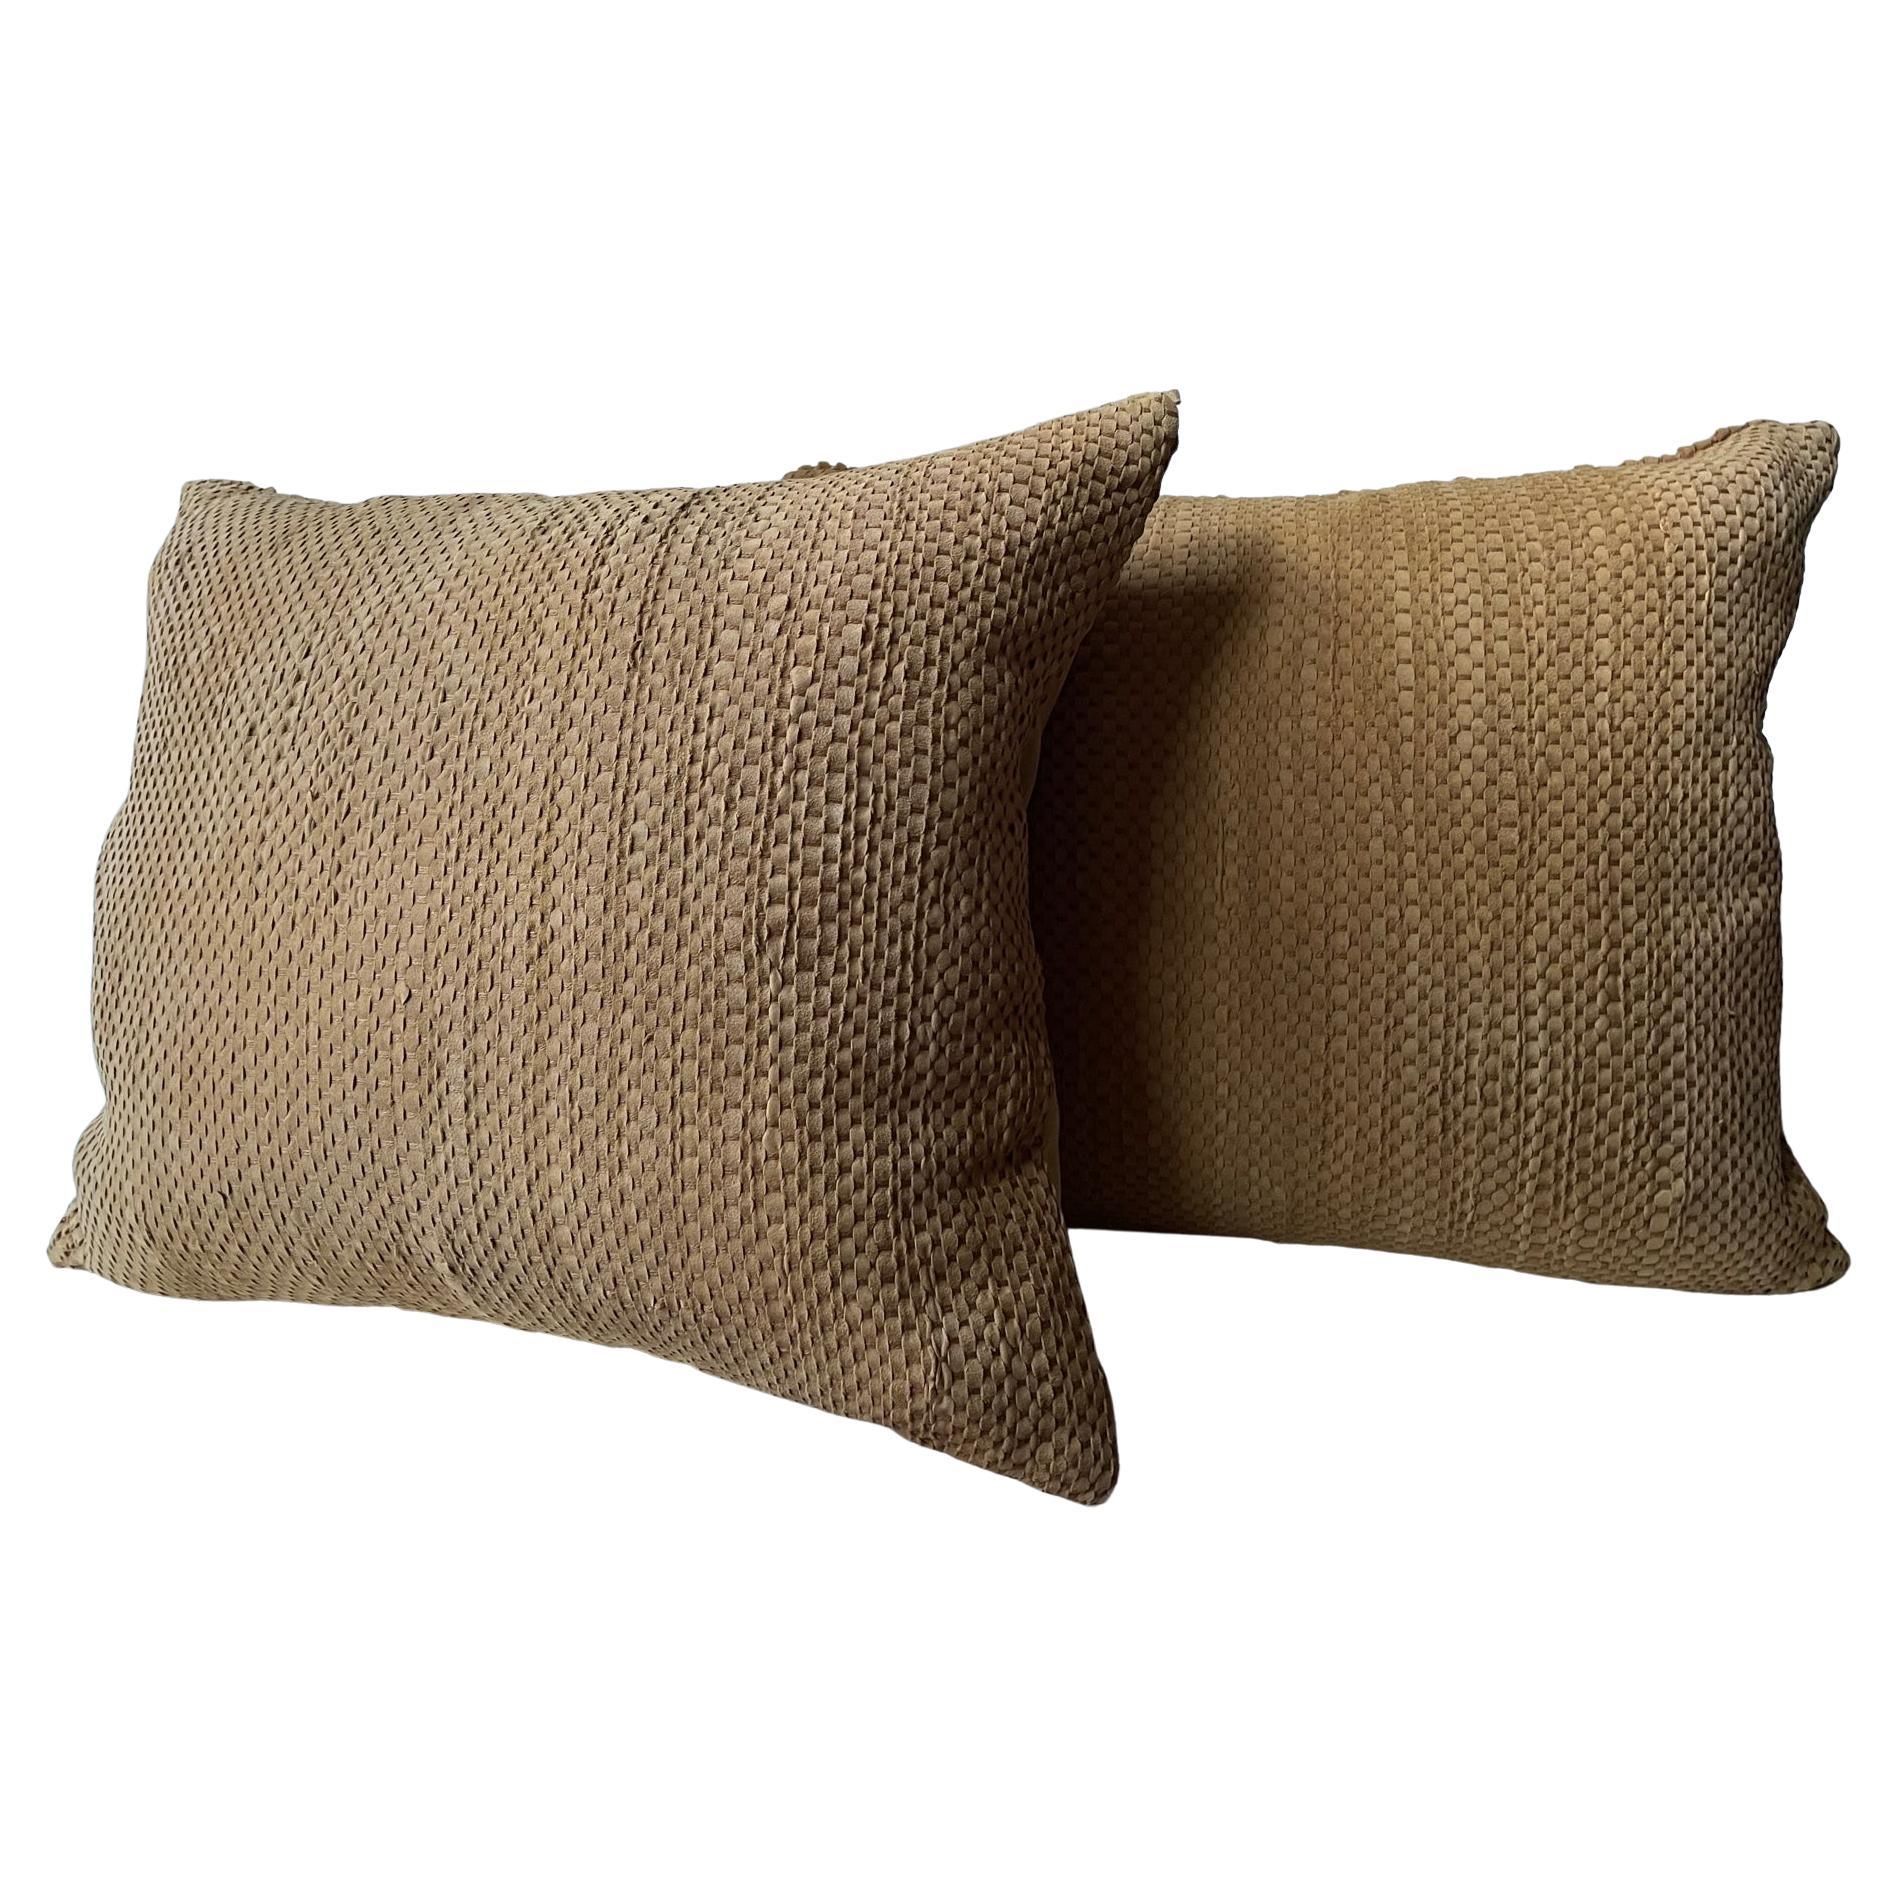 Pair Hand Woven Suede Cushions Colour Ginger Square Shaped For Sale